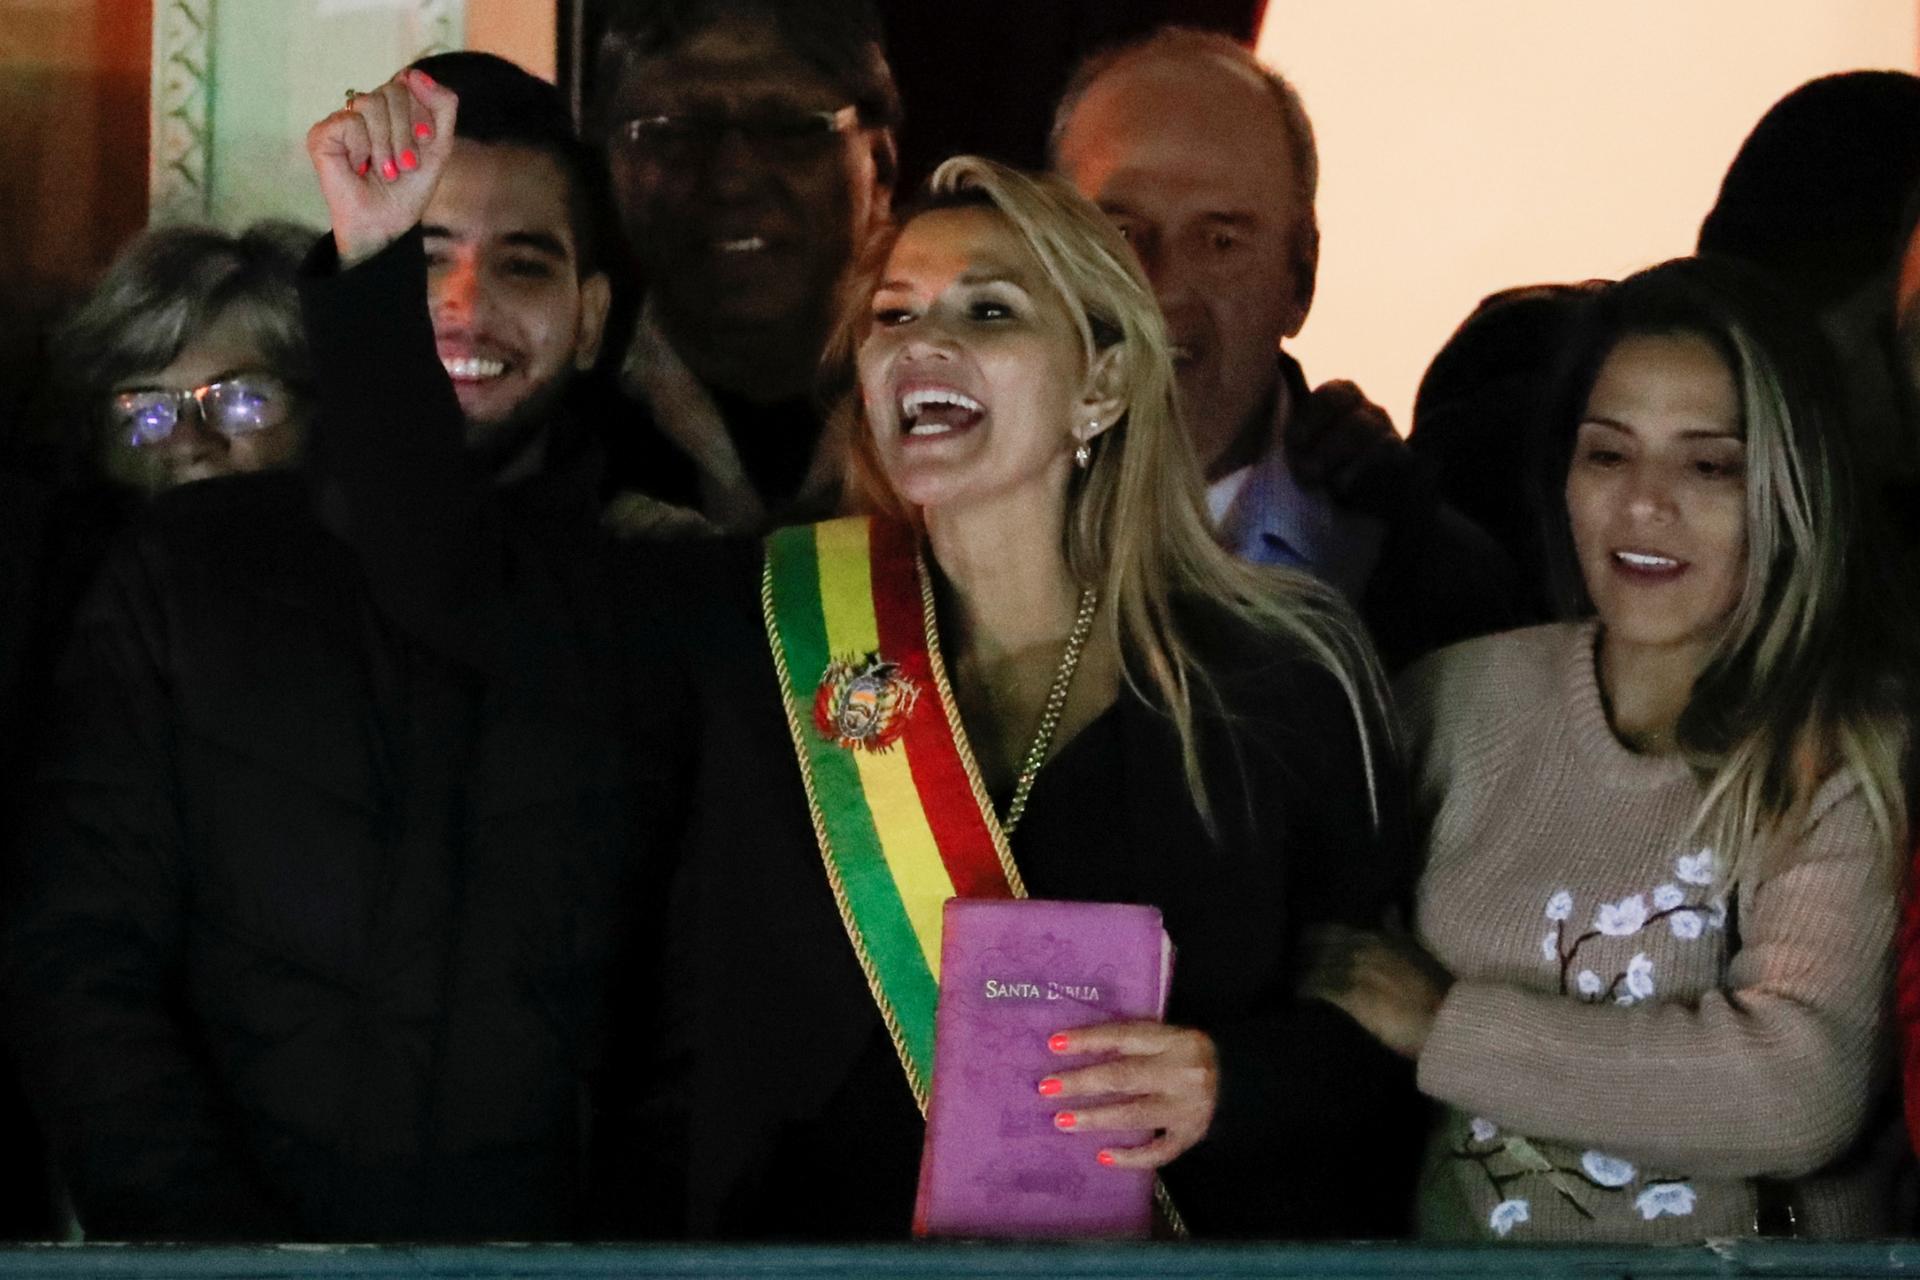 Bolivian Senator Jeanine Añez gestures after she declared herself as Interim President of Bolivia, at the balcony of the Presidential Palace, in La Paz, Bolivia, on Nov. 12, 2019.